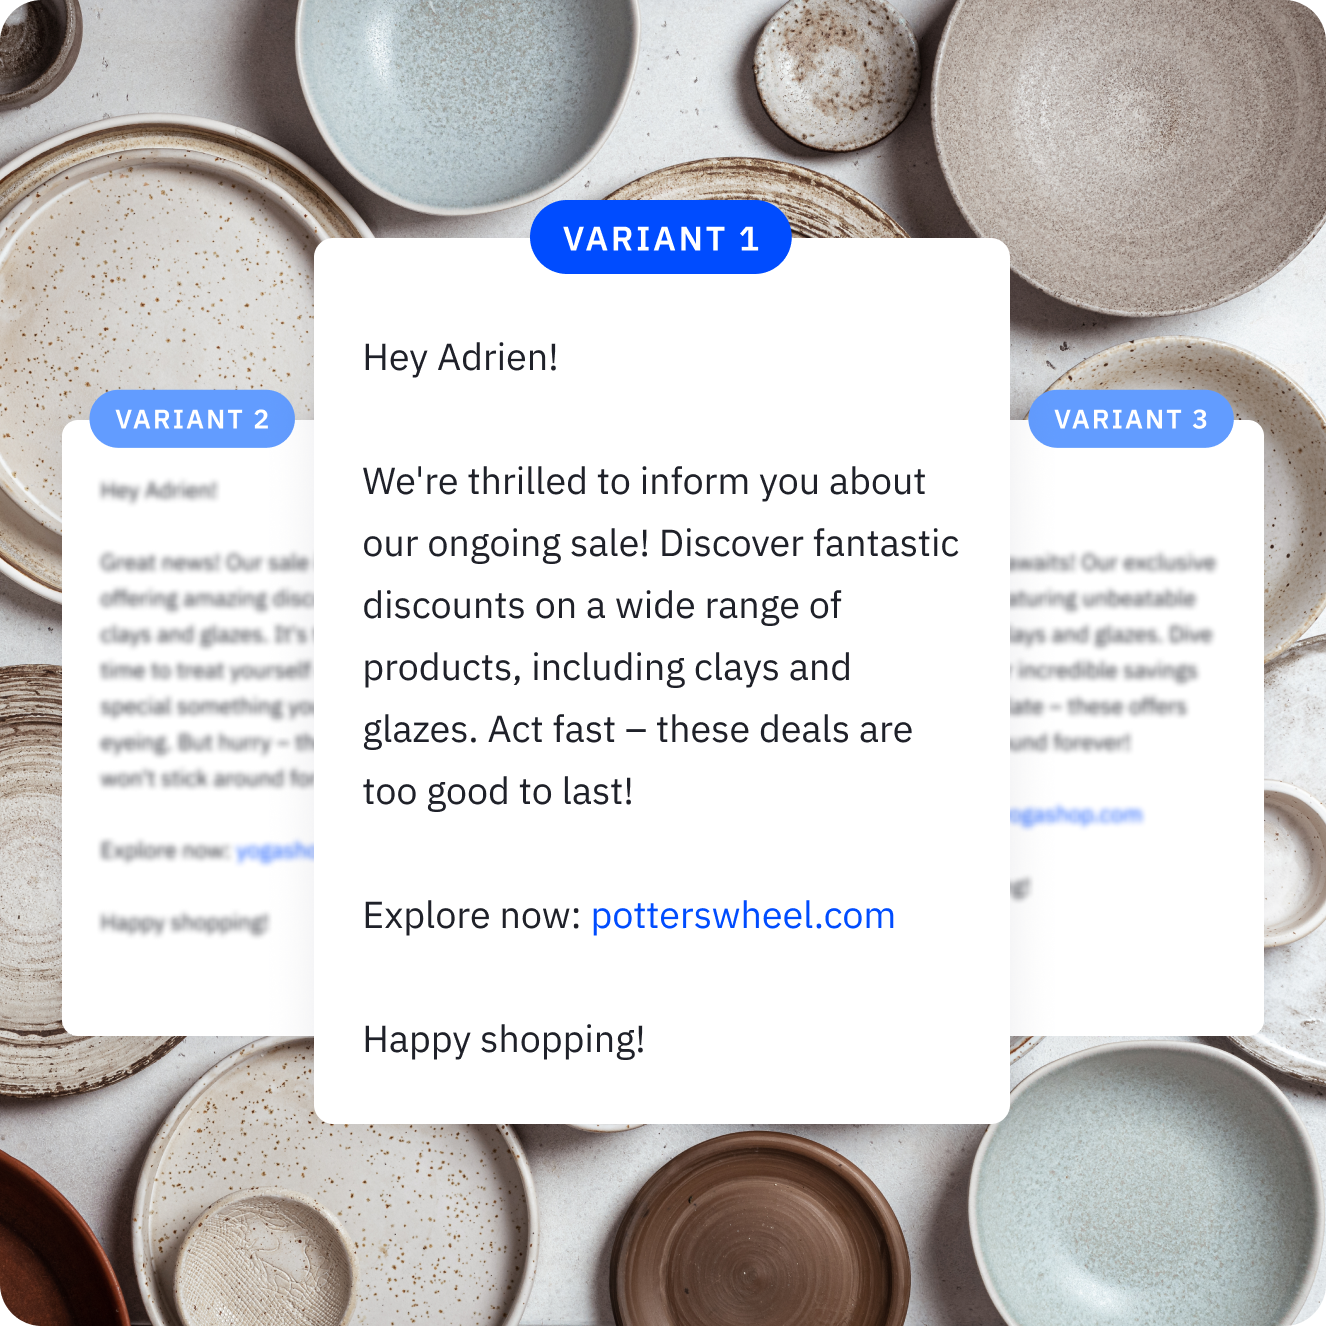 Three variants of an email for a pottery business, with the one in the forefront being selected by AI as the most effective.